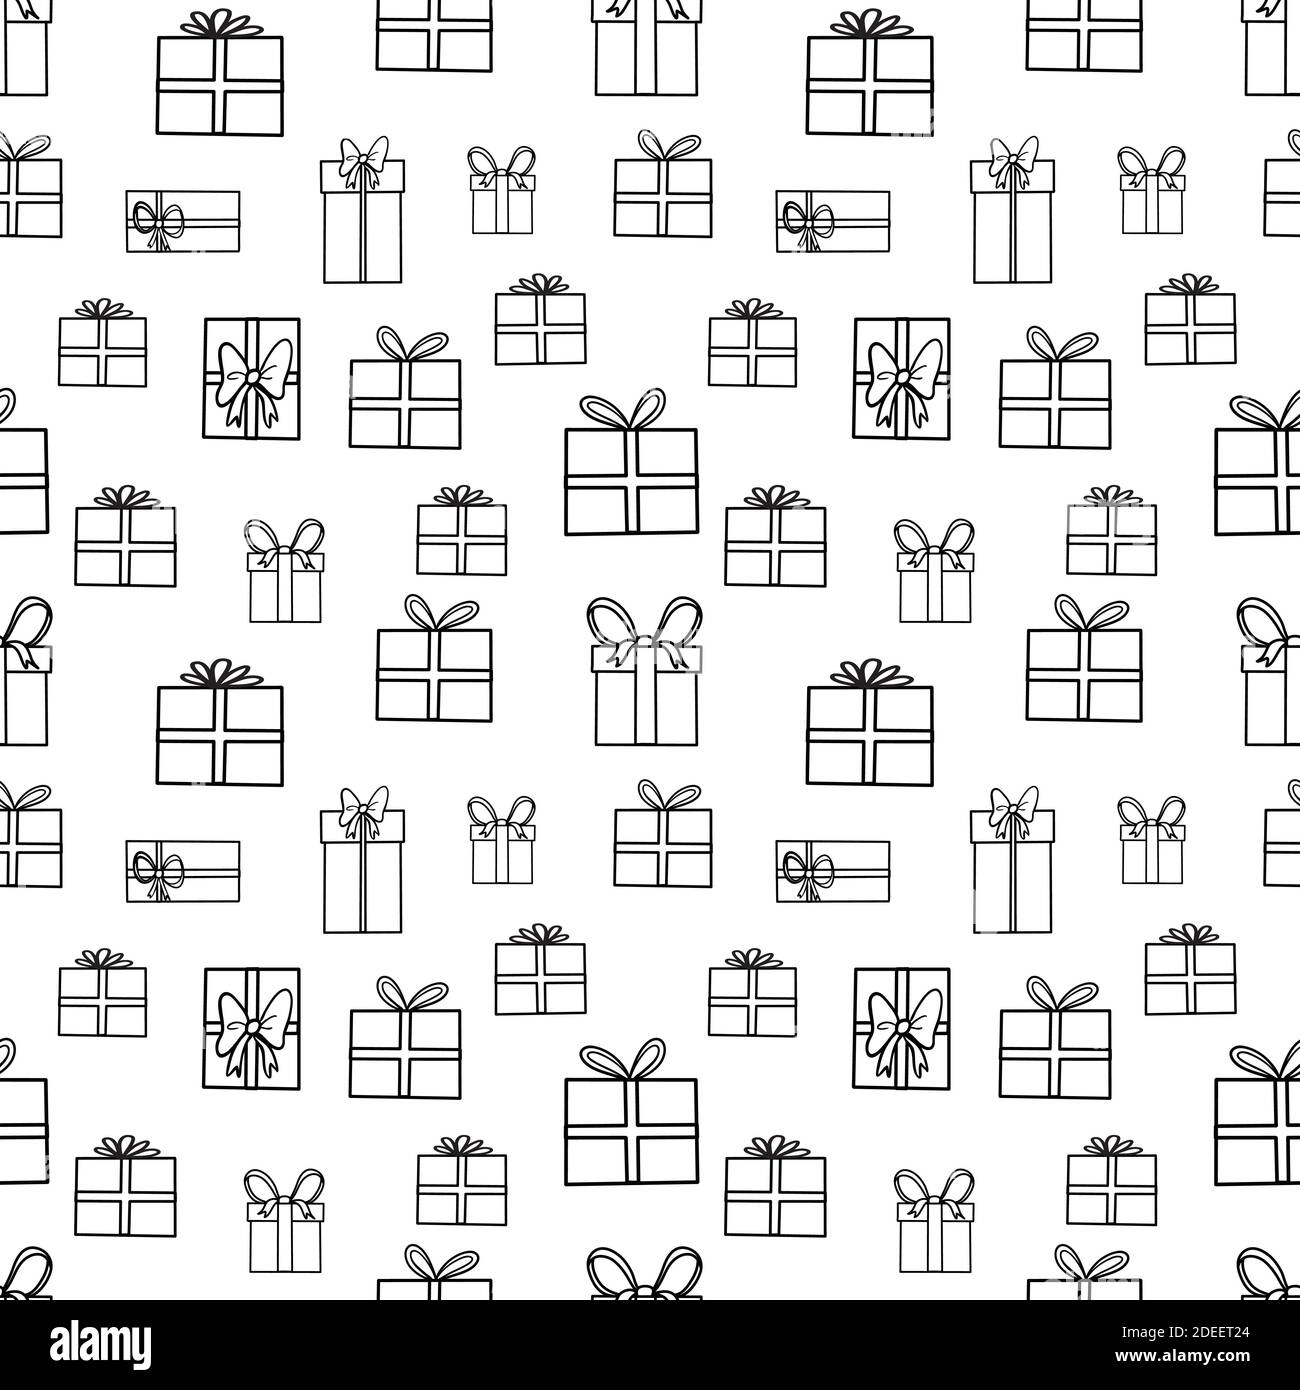 Vector Simple Pattern Of Boxes, Gifts On A White Background. Used